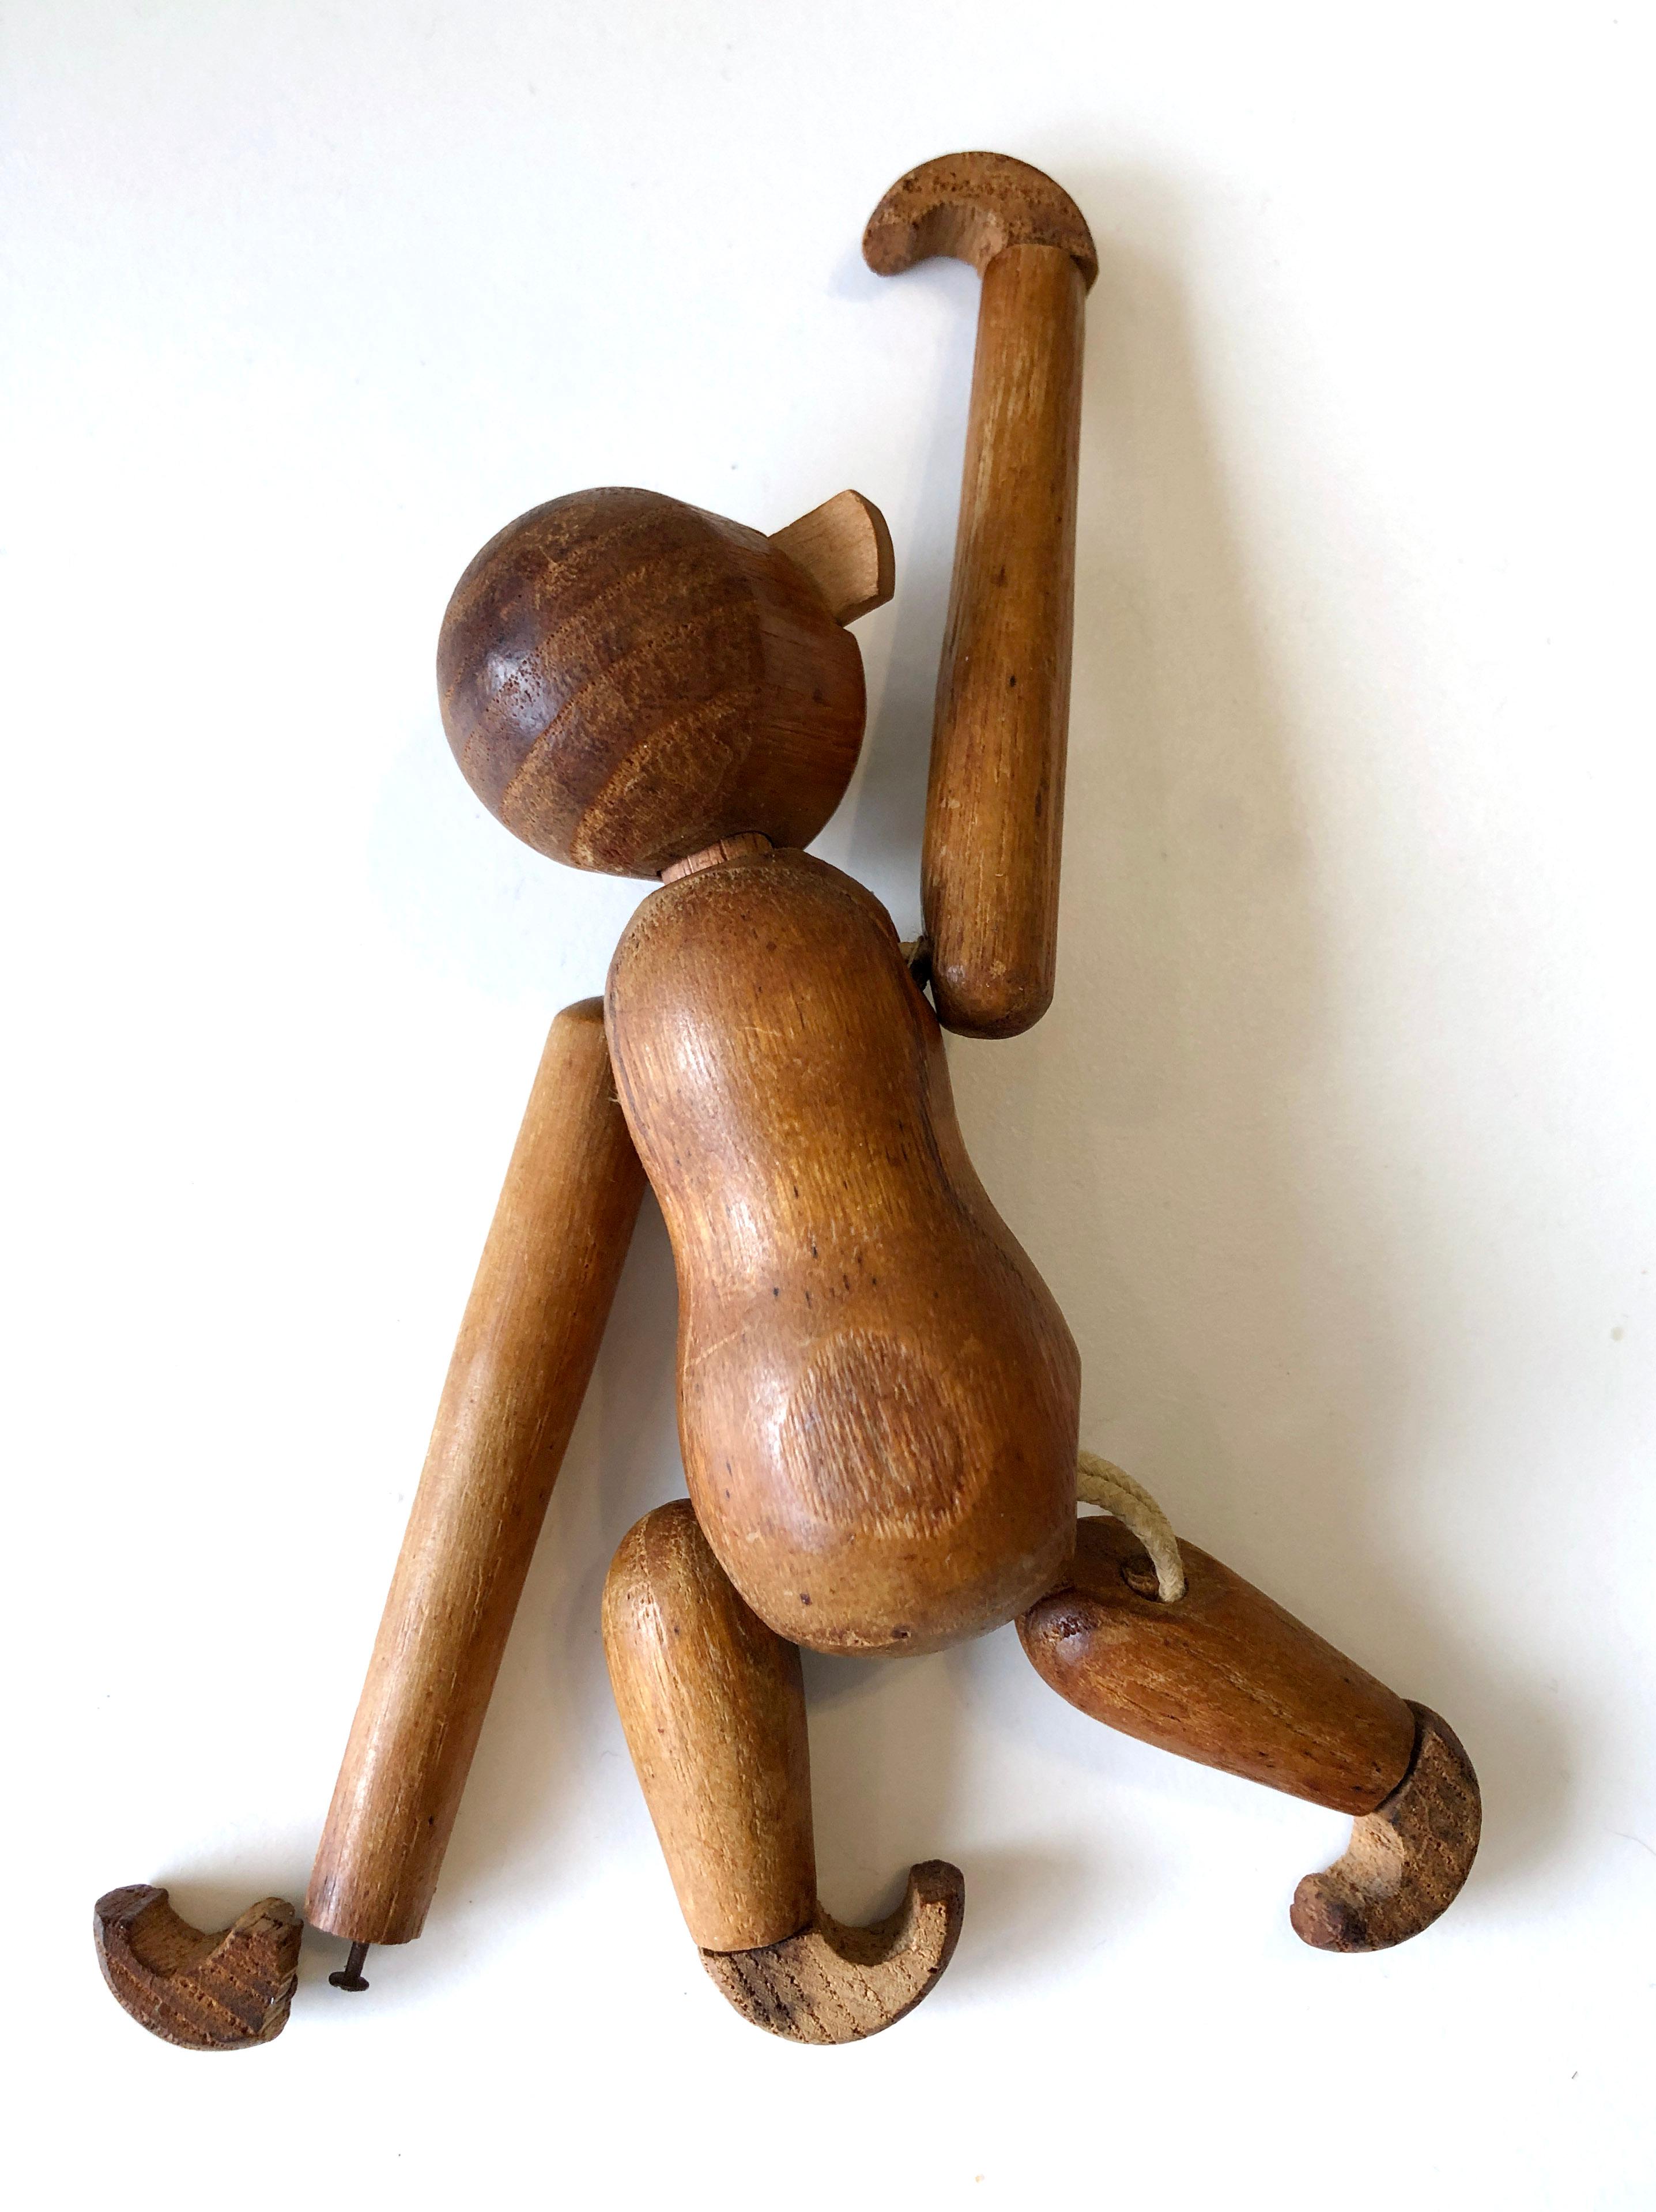 Vintage 1950's small wooden monkey - Kay Bojesen style For Sale 4